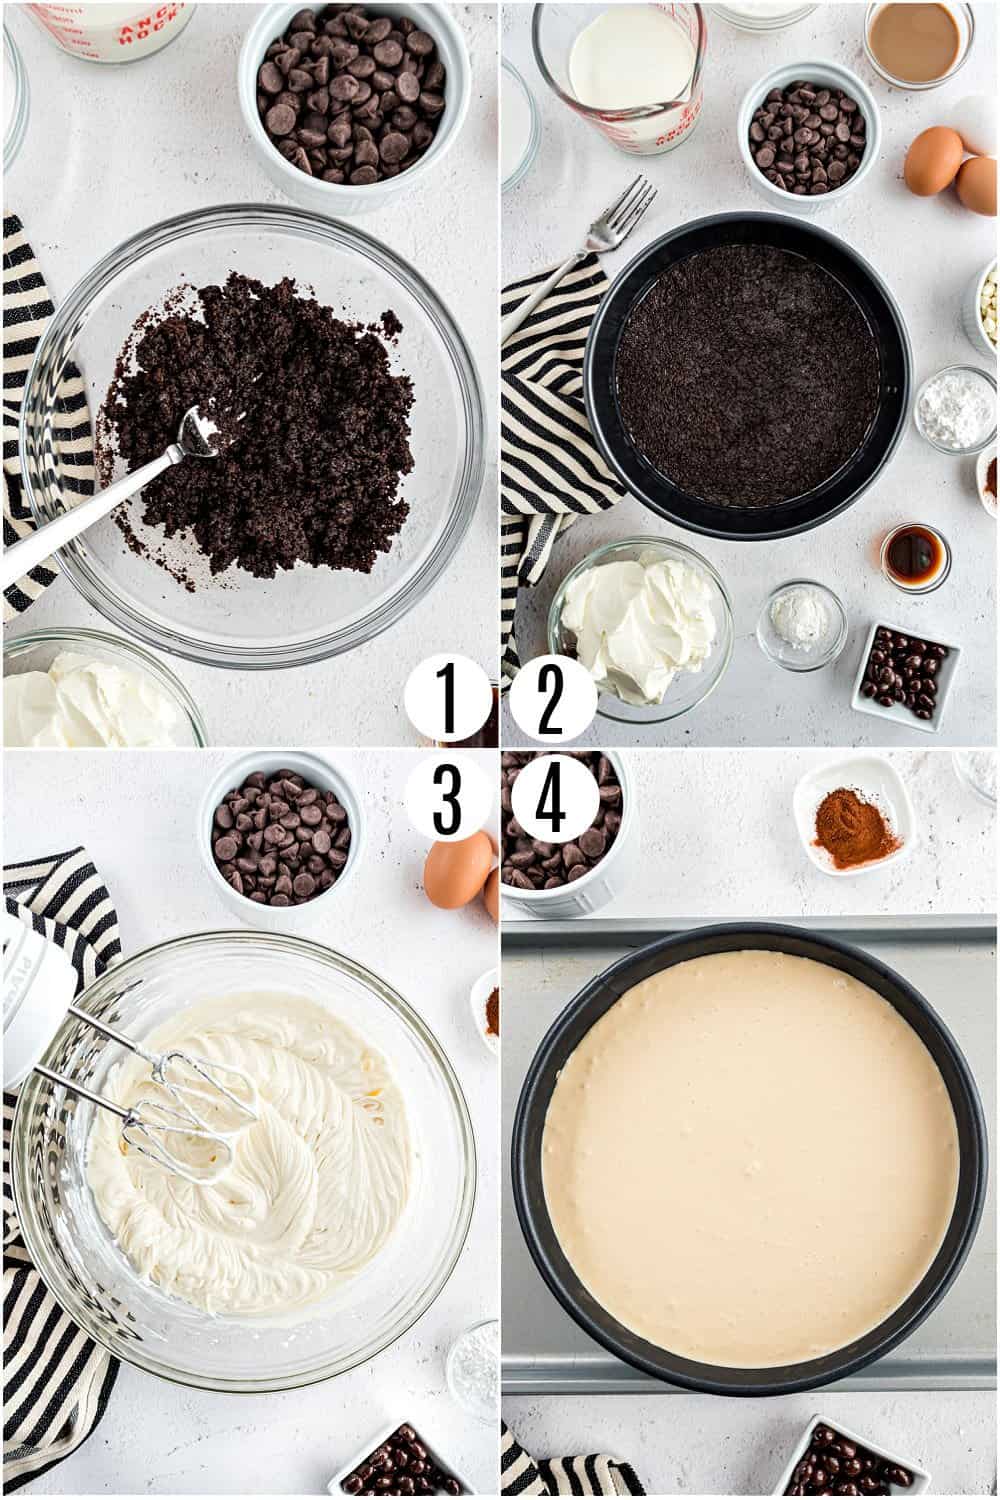 Step by step photos showing how to make a cheesecake.